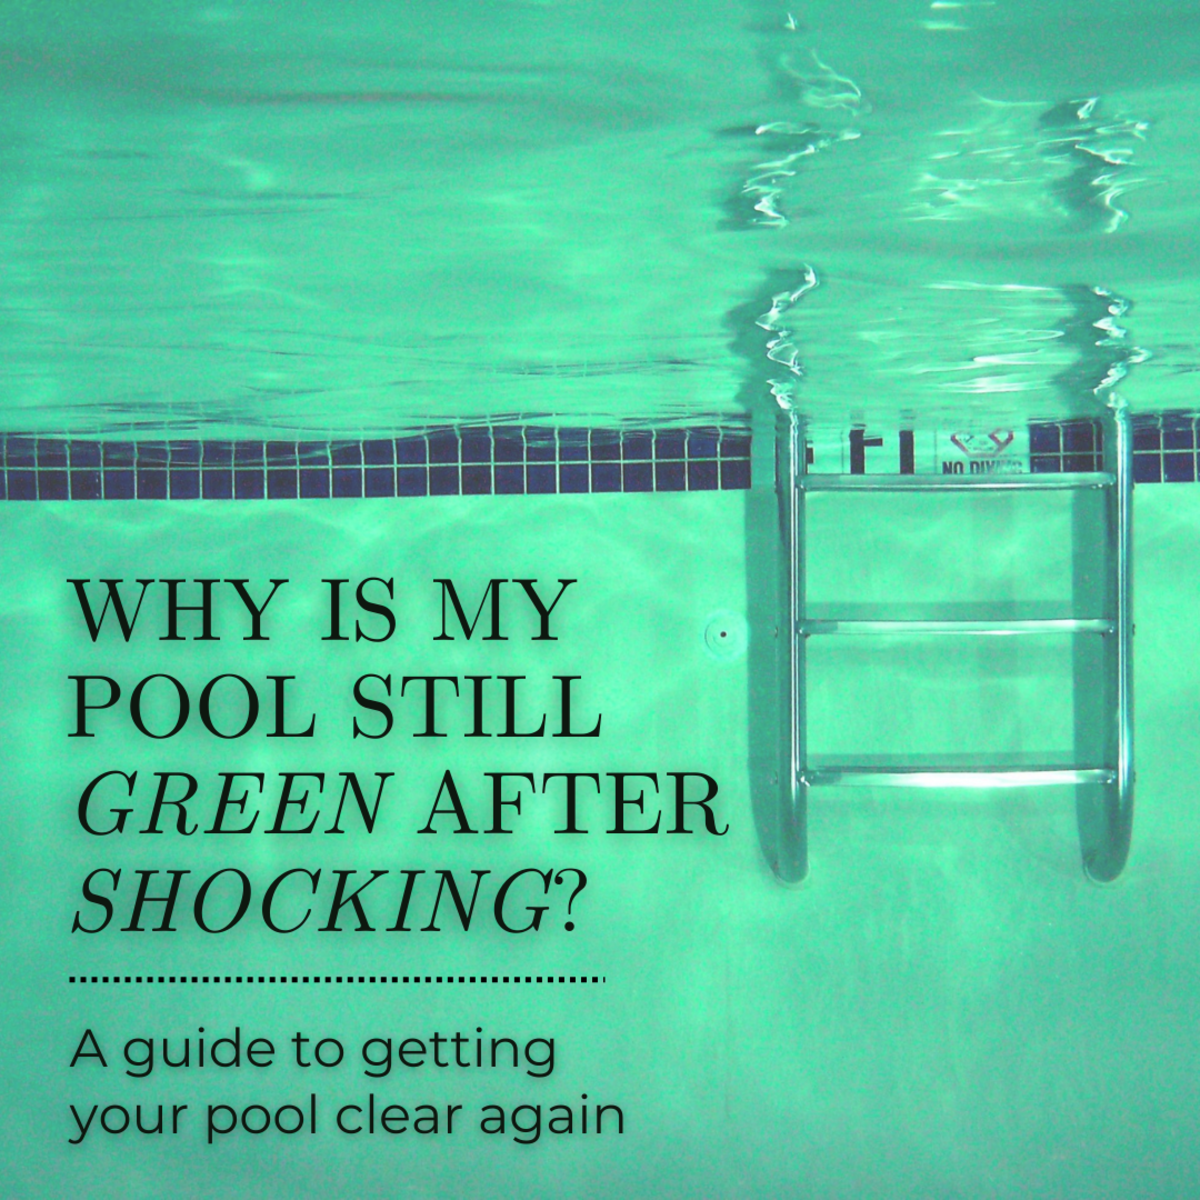 This guide will help you troubleshoot why your pool is still green or cloudy after shocking it.